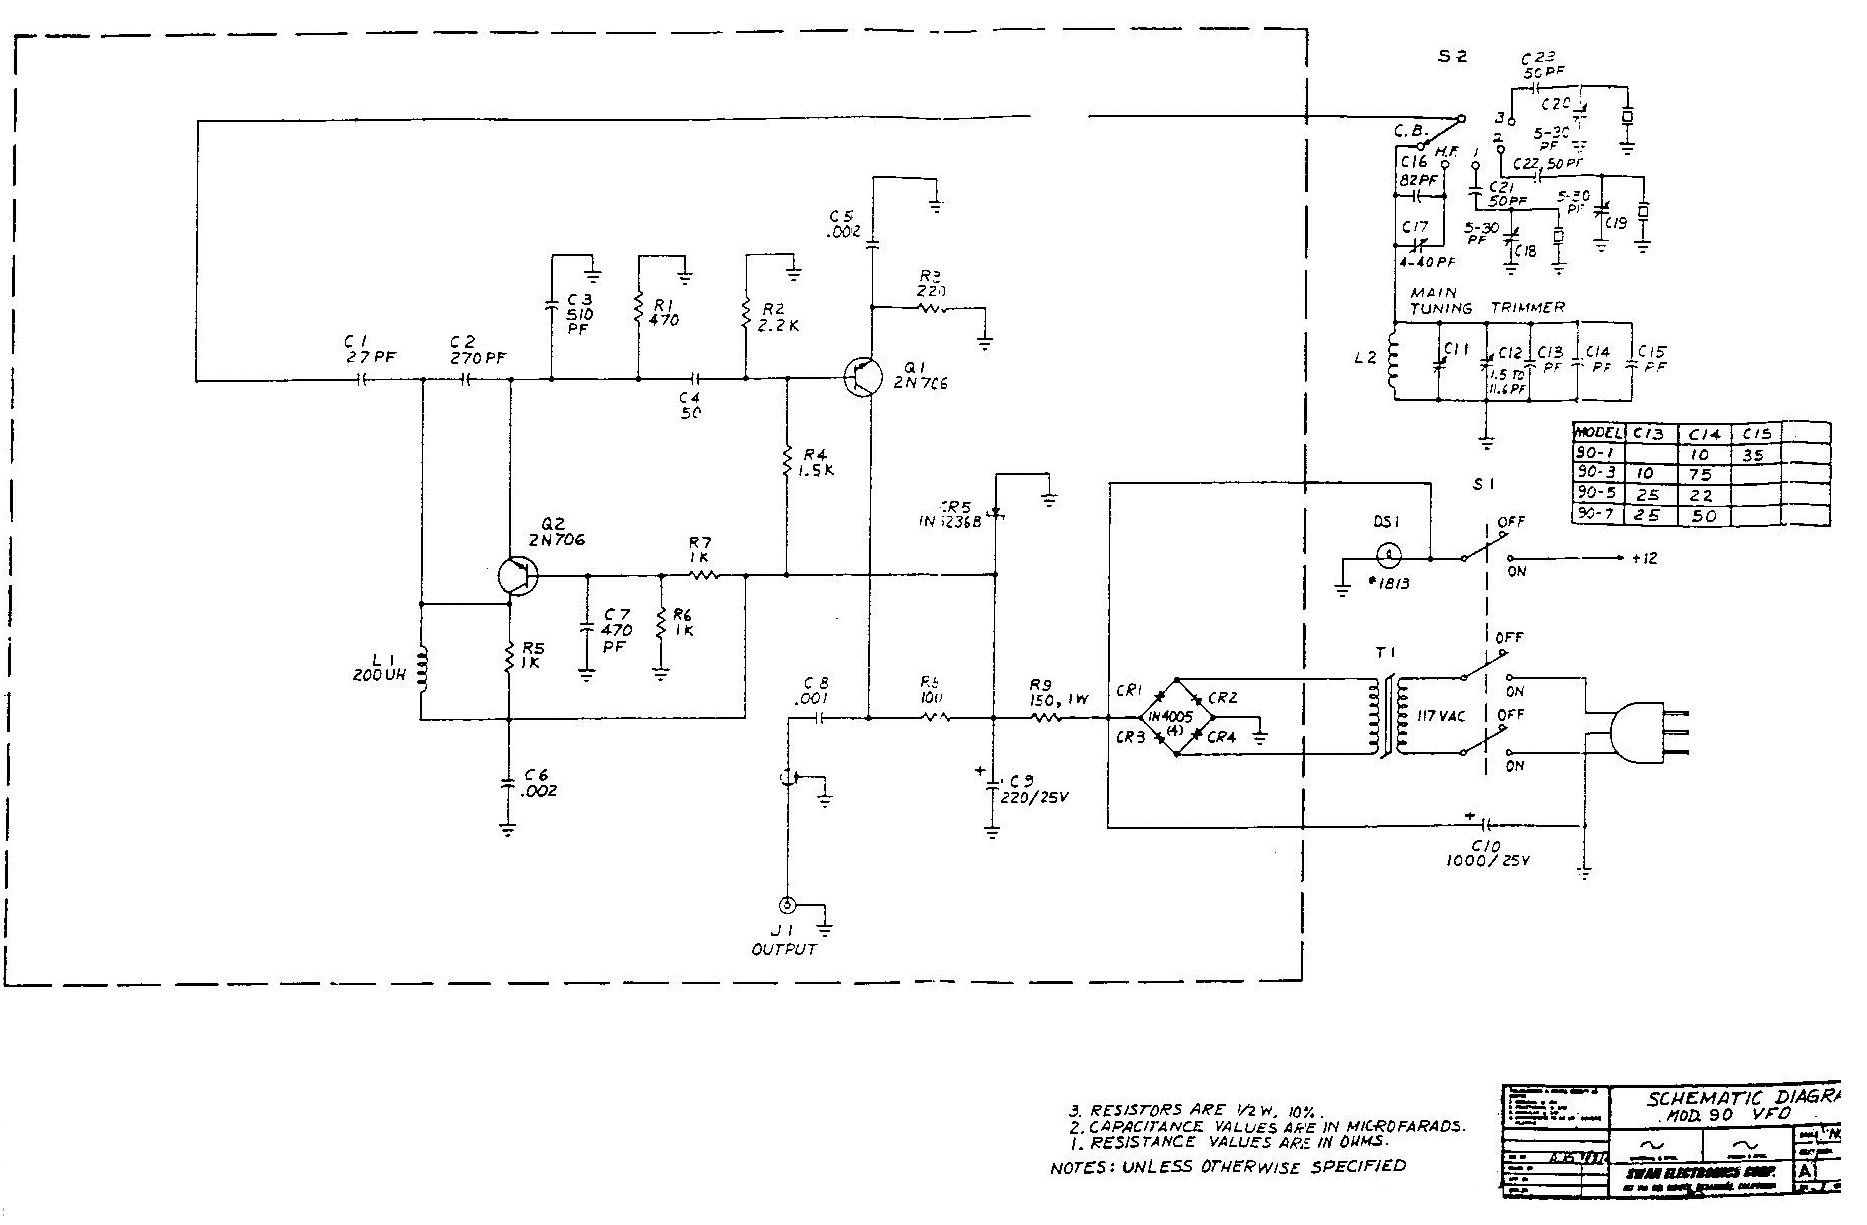 Siltronix VFO 90 (schematic) R6 needs to be 1k not 270n